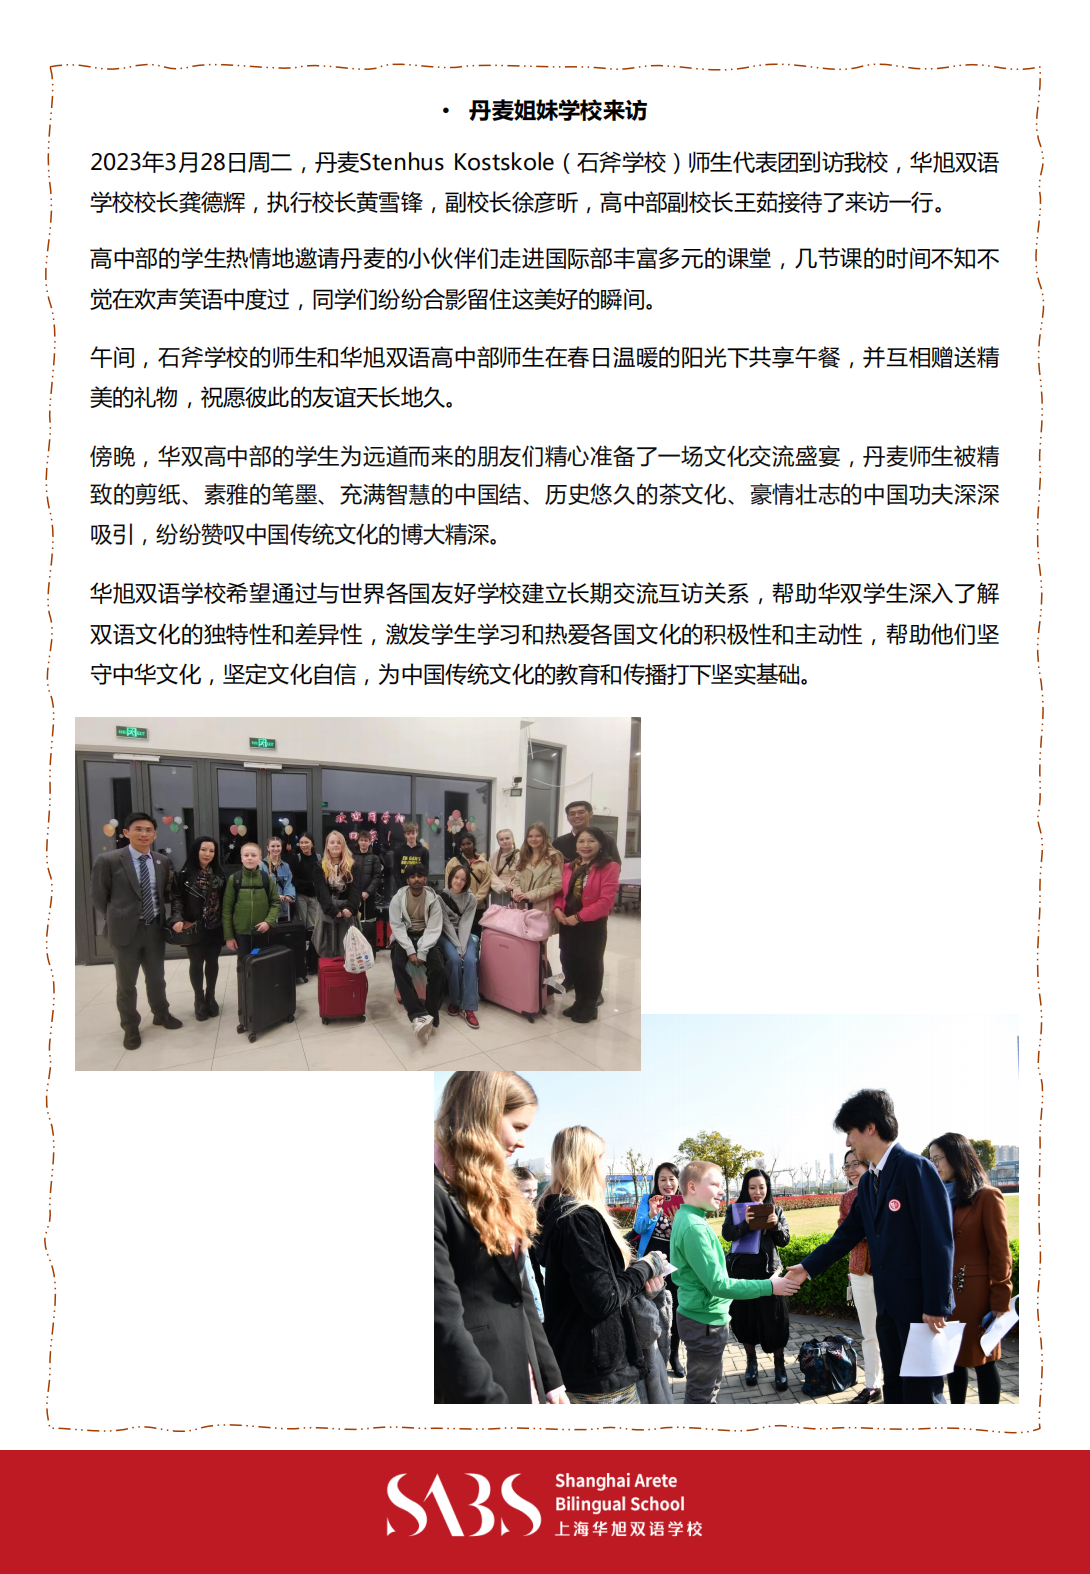 HS 4th Issue Newsletter pptx（Chinese）_04.png